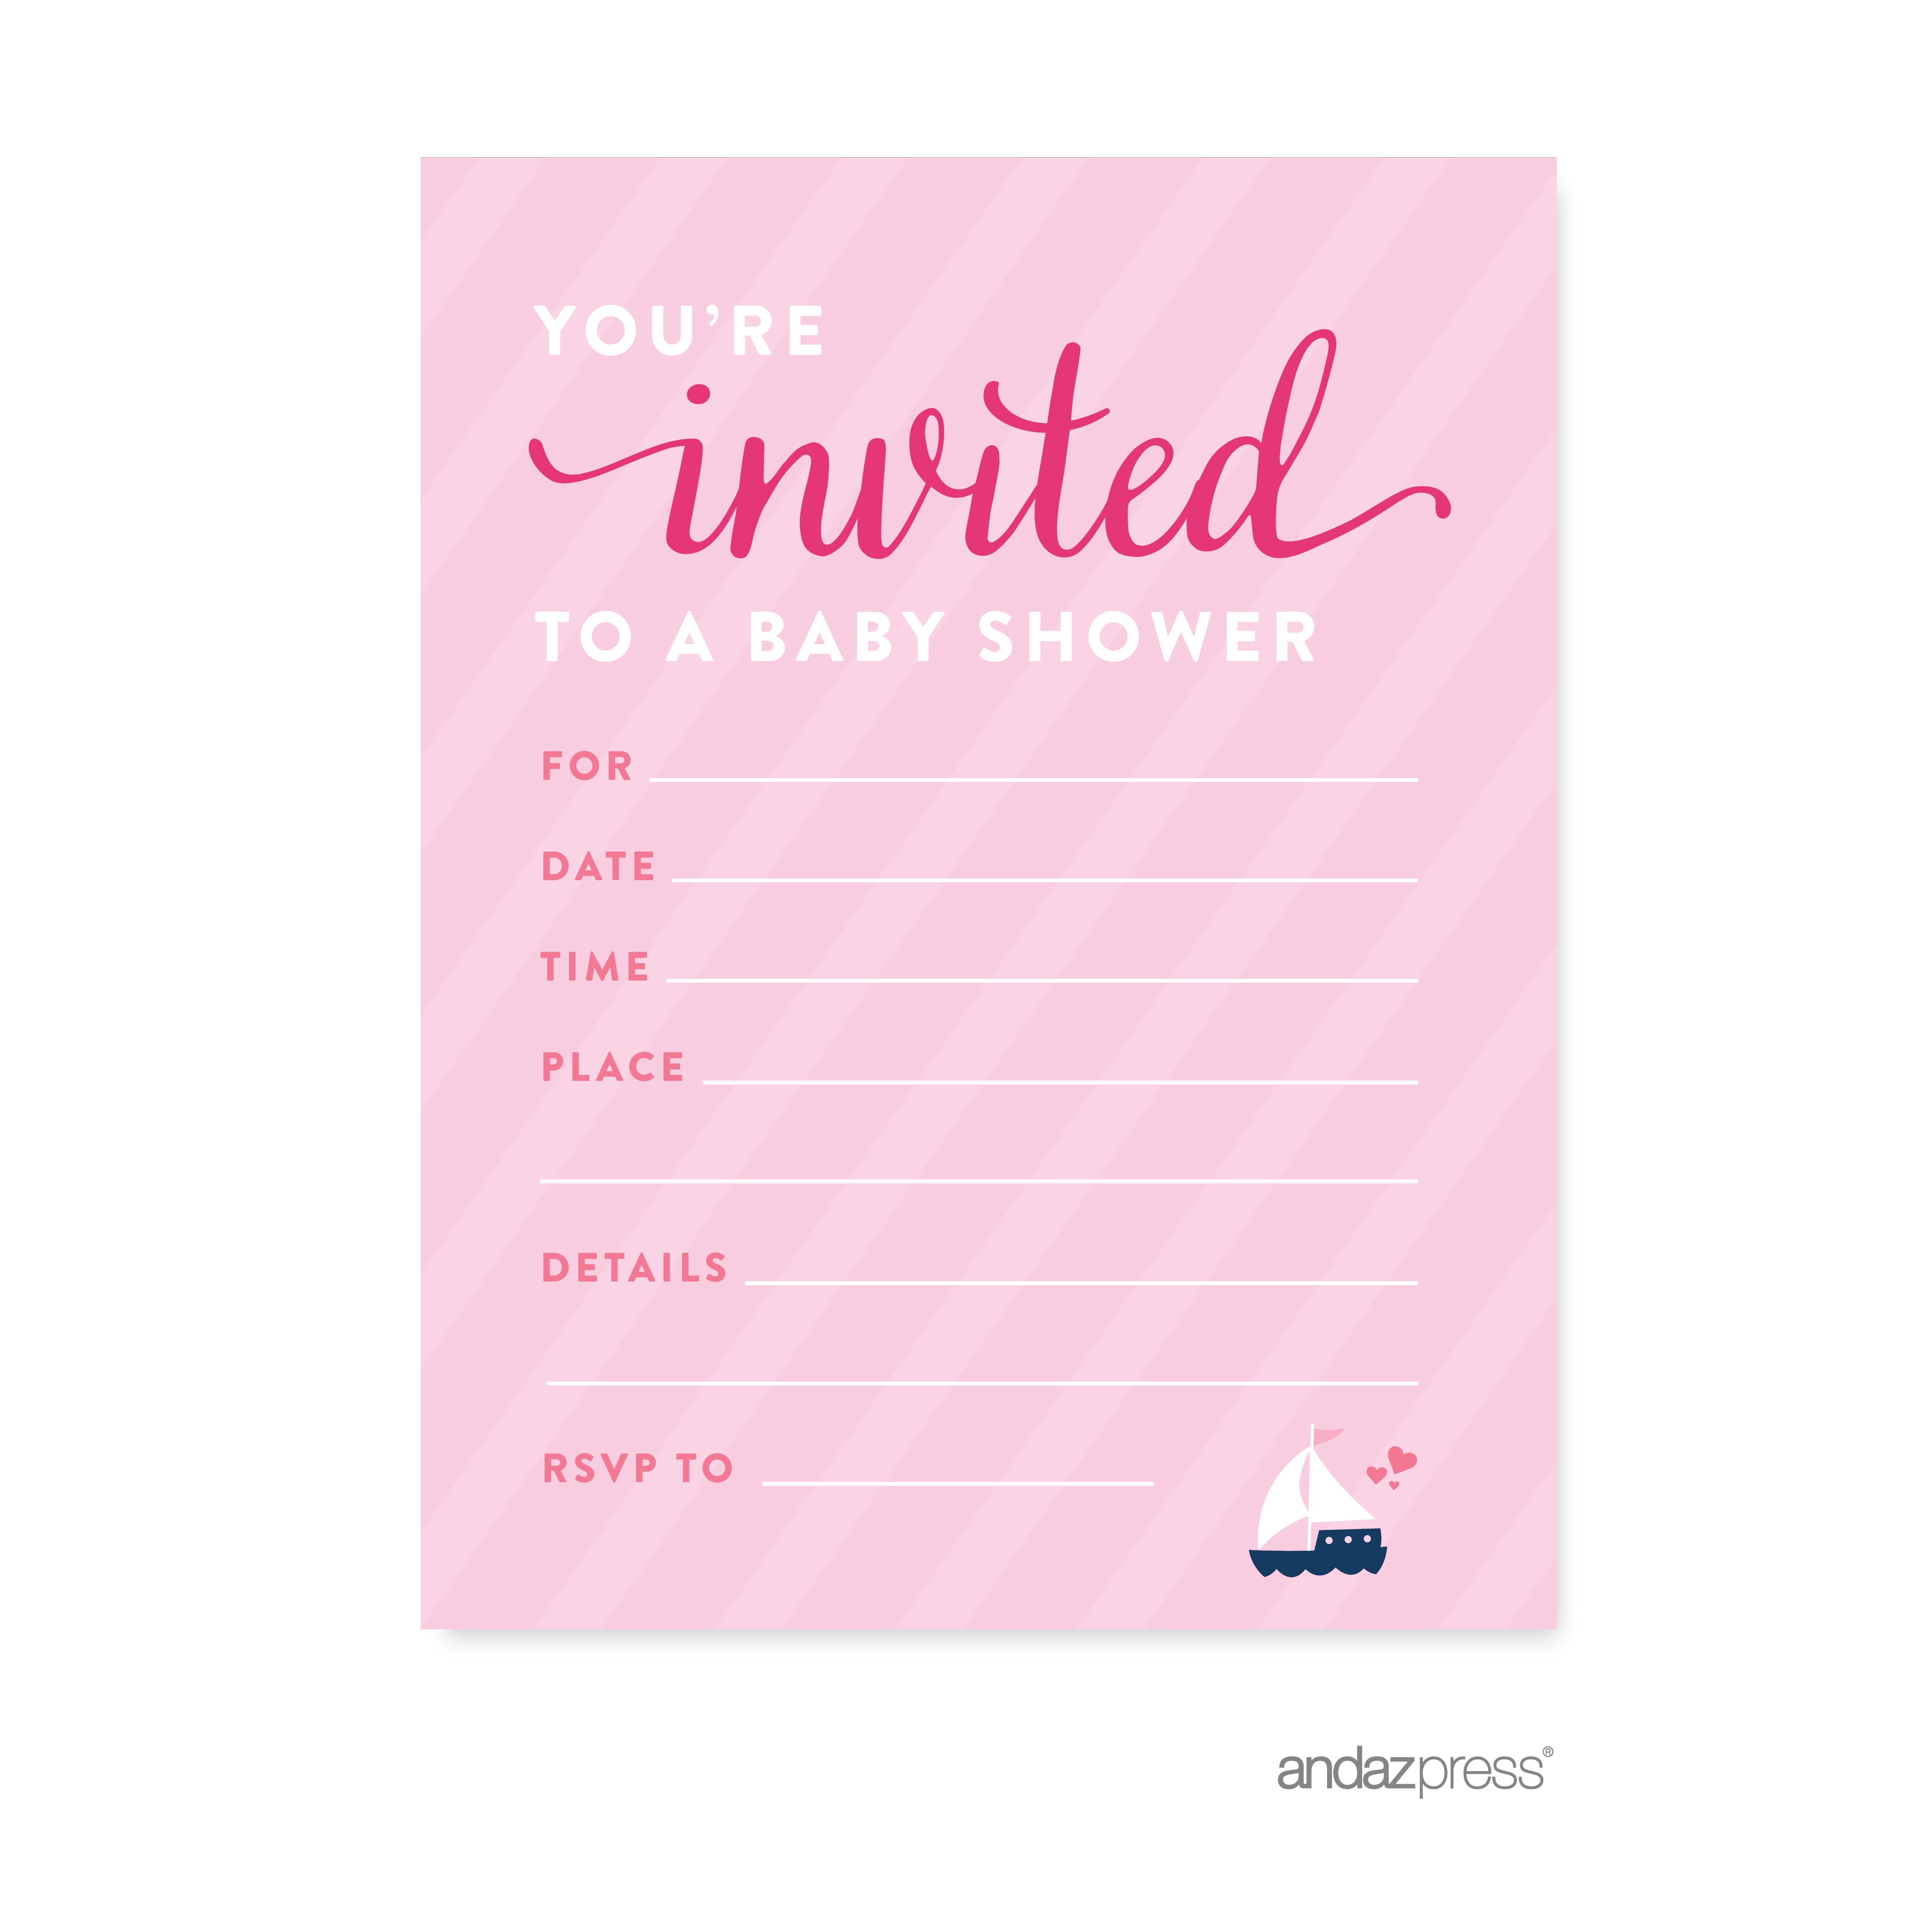 Pink Gold Glitter 1st Birthday Blank Party Invitations with Envelopes,  20-Pack 